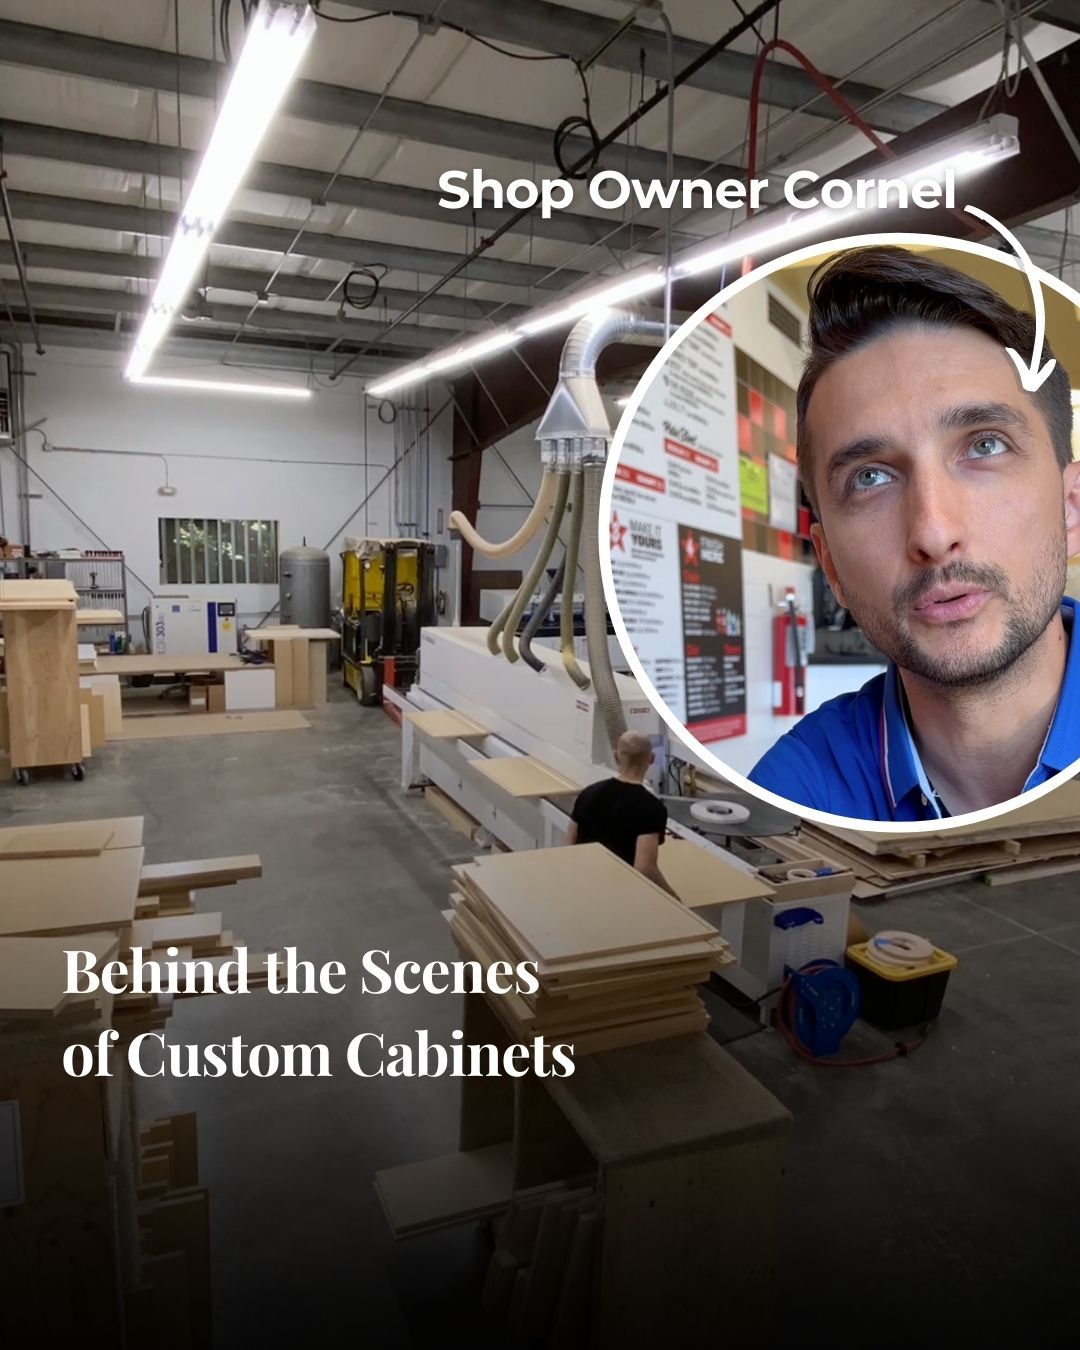 The Power of Listening: Creating Custom Cabinets with Bora Cabinetry